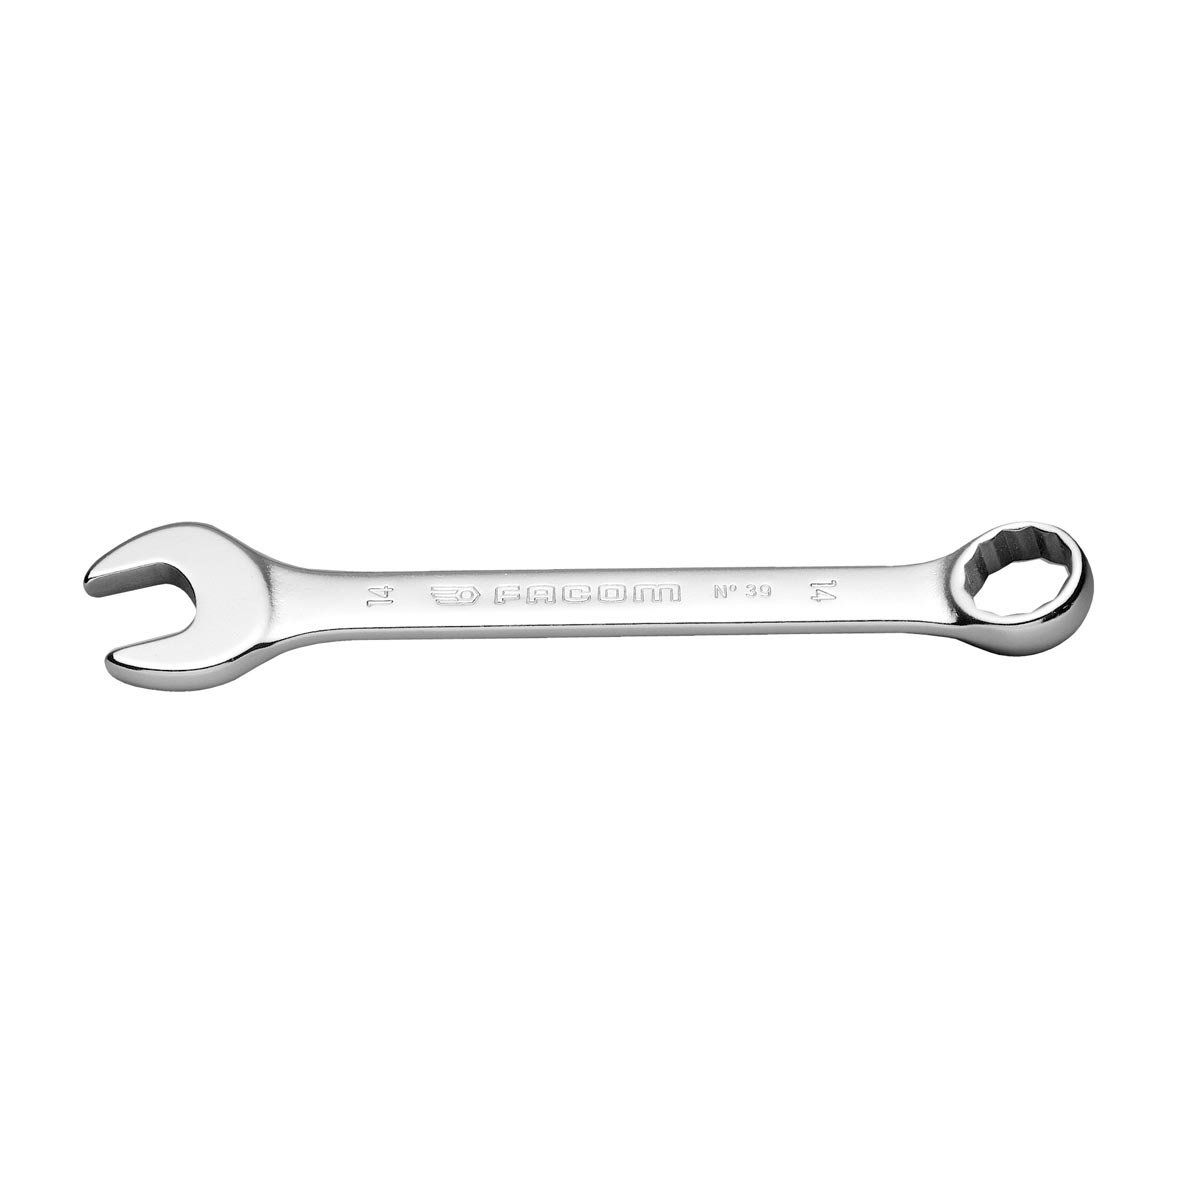 Facom 39.17 Short Combination Wrench